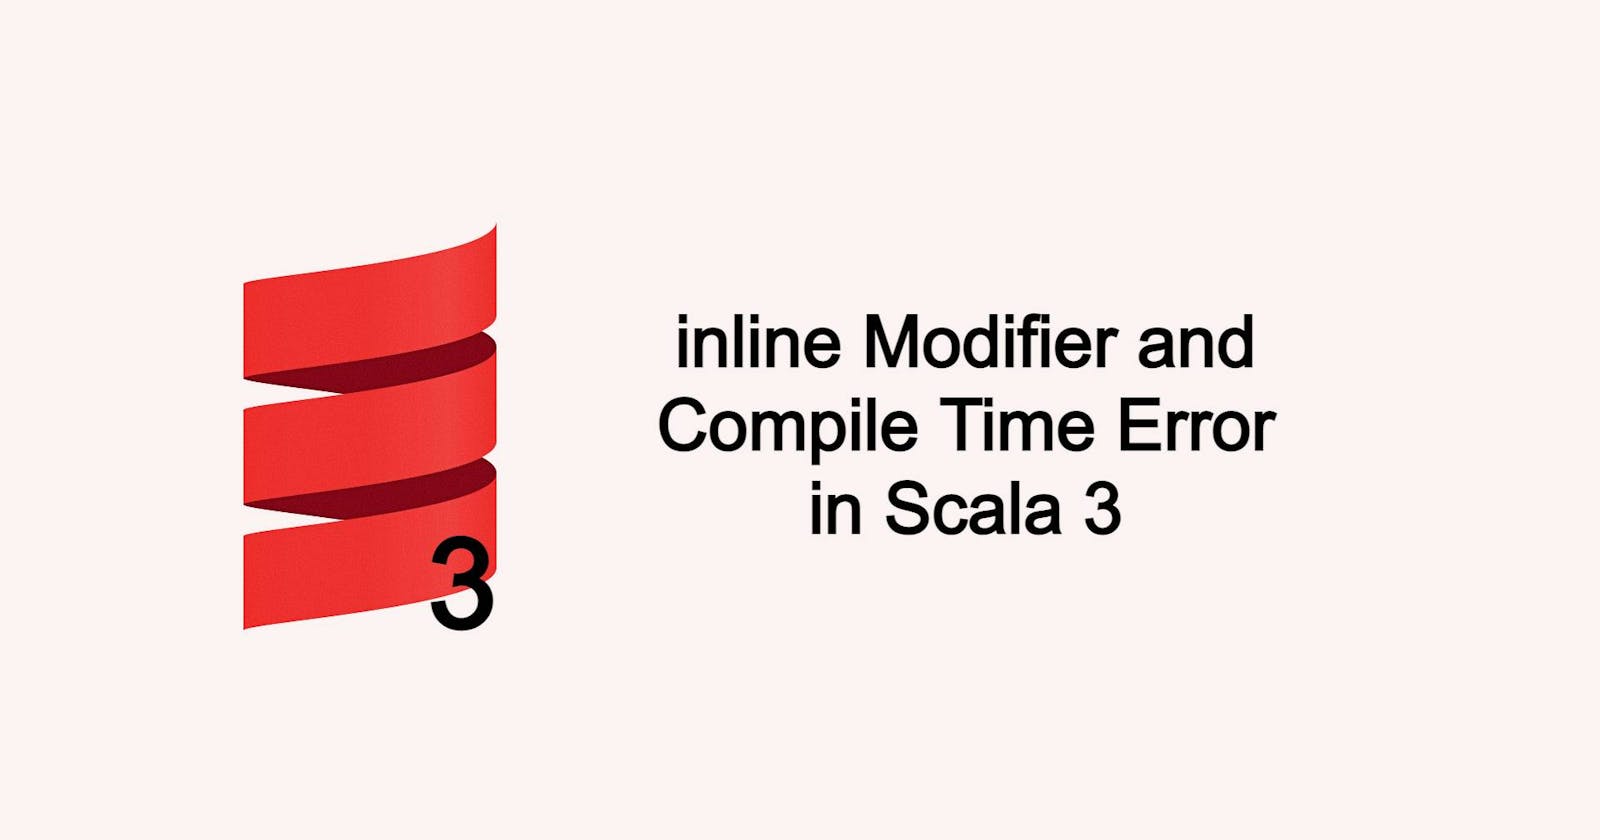 Compile Time Error Generation using inline in Scala 3